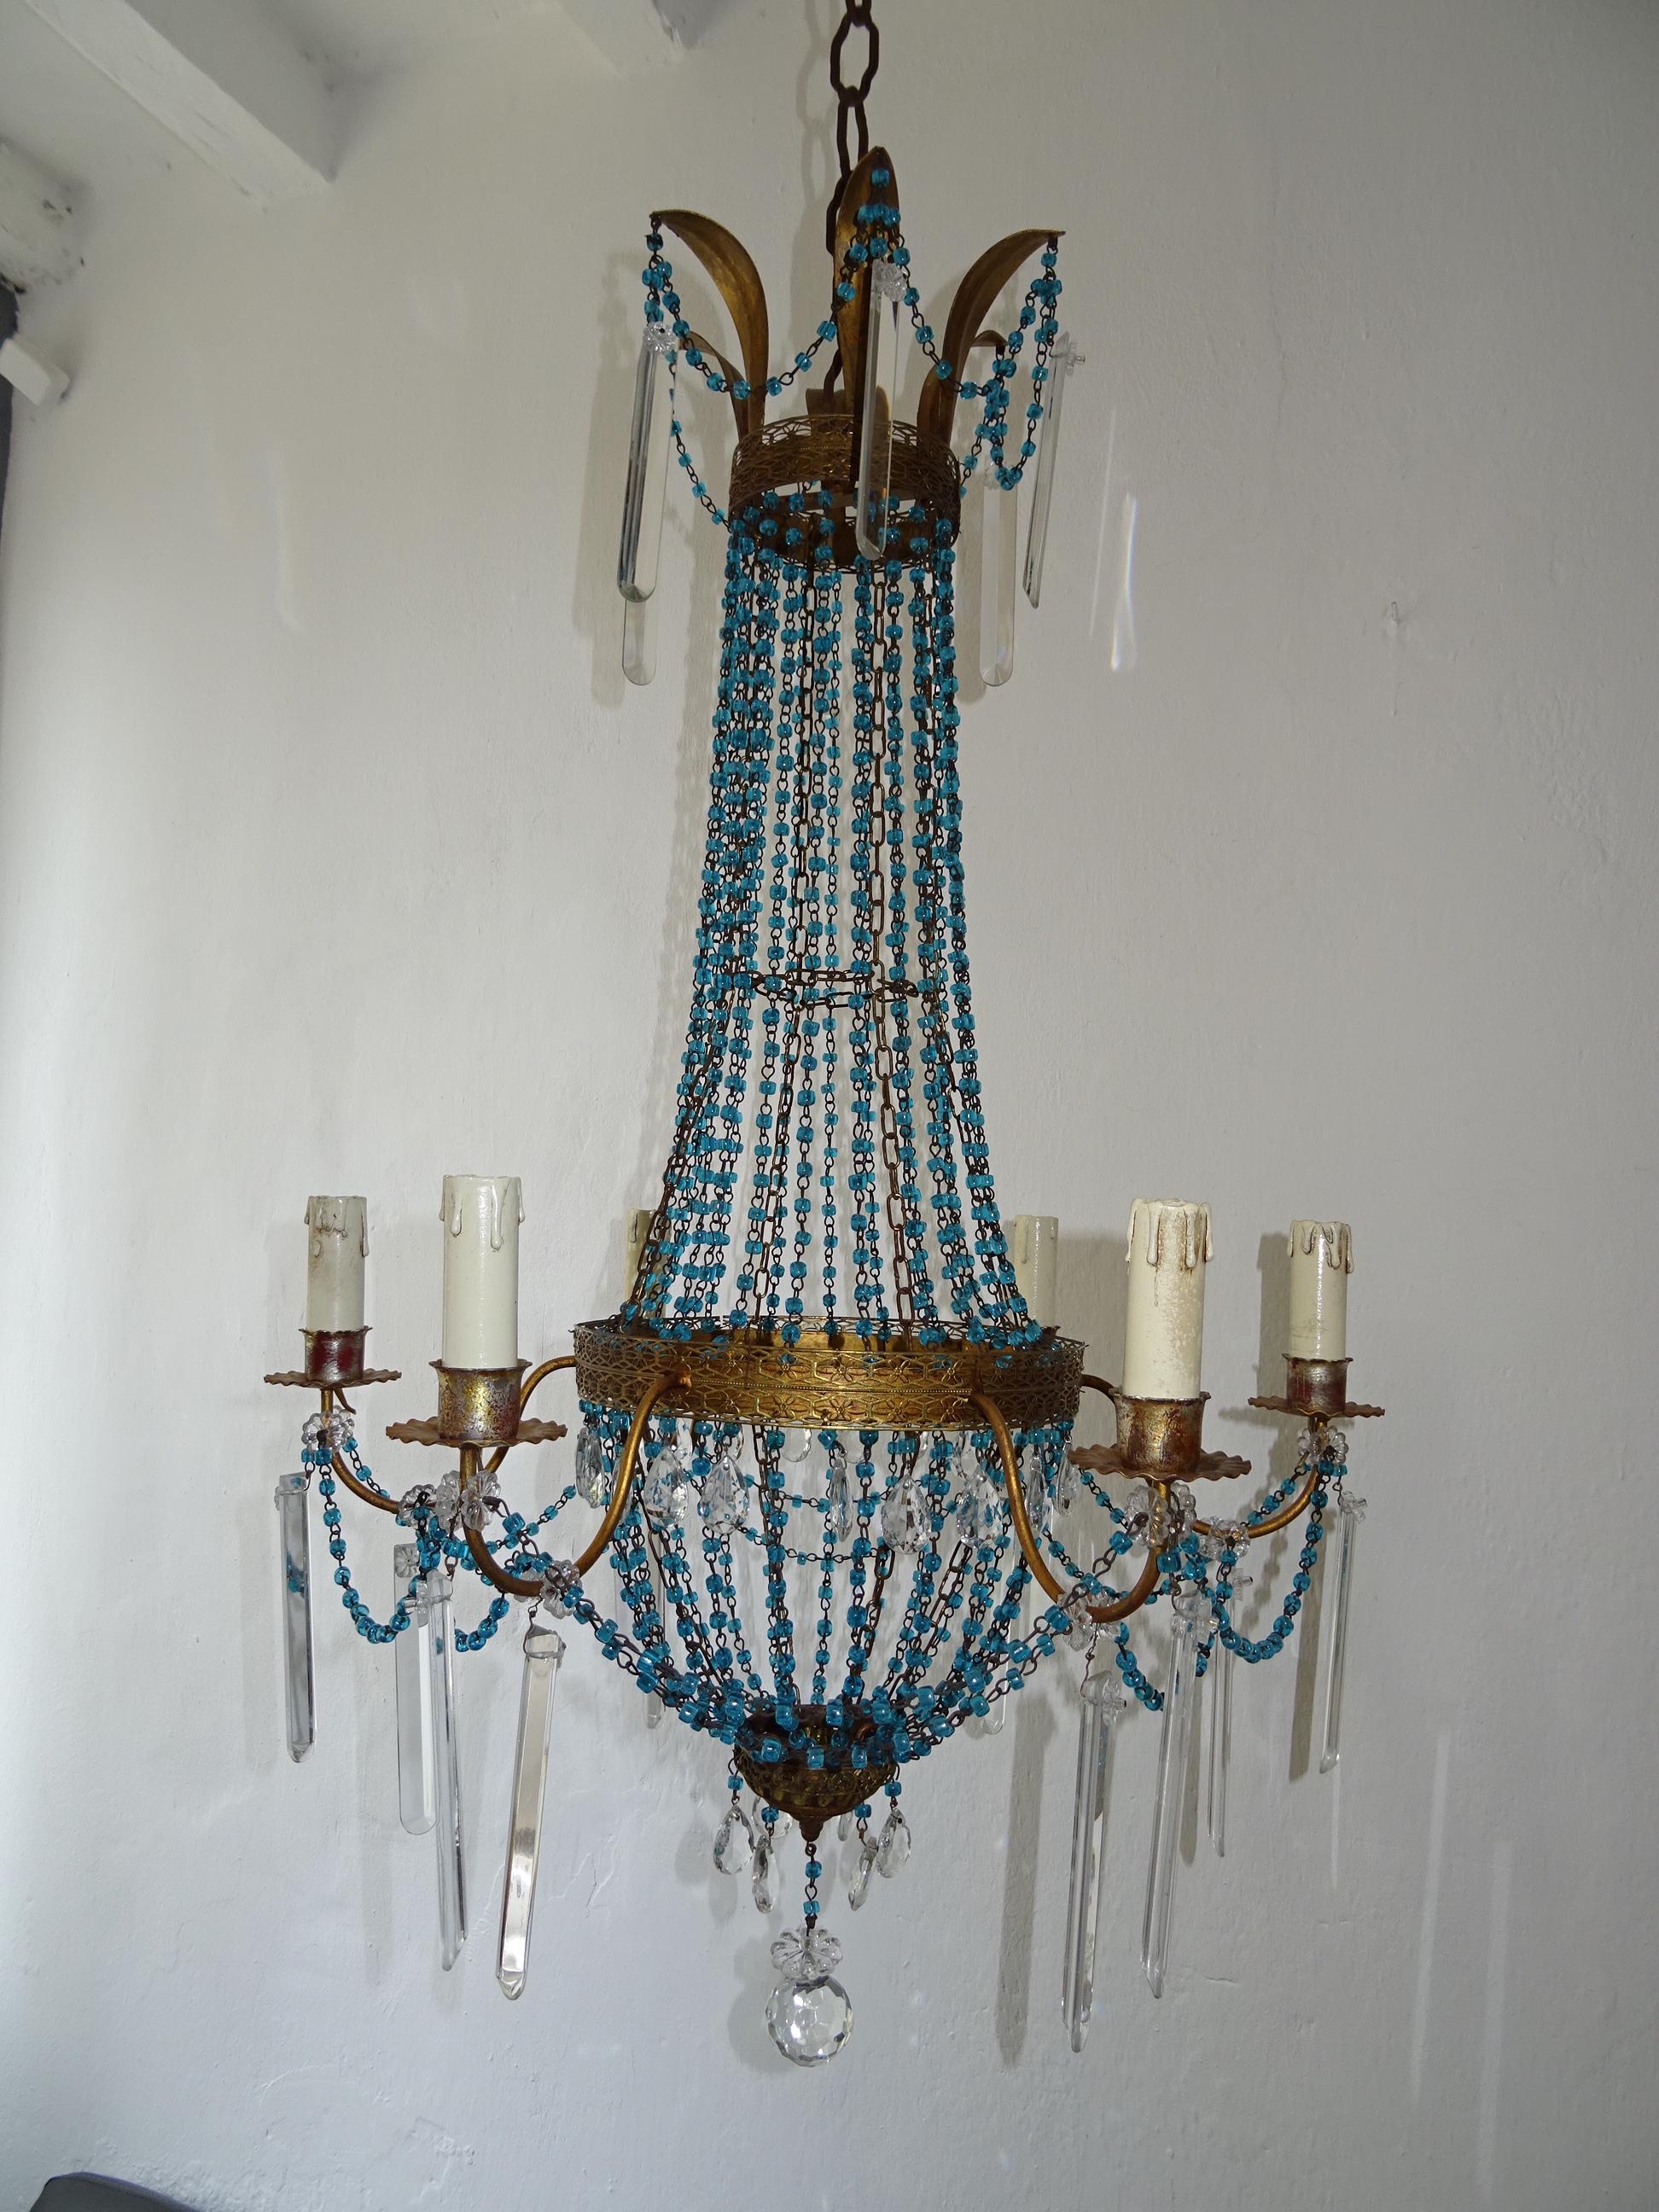 Housing 6 lights. Will be rewired with certified UL US sockets for the USA and appropriate sockets for all other countries and ready to hang. Metal body with swags of rare blue glass macaroni beads and vintage crystal prisms.  I have never seen a